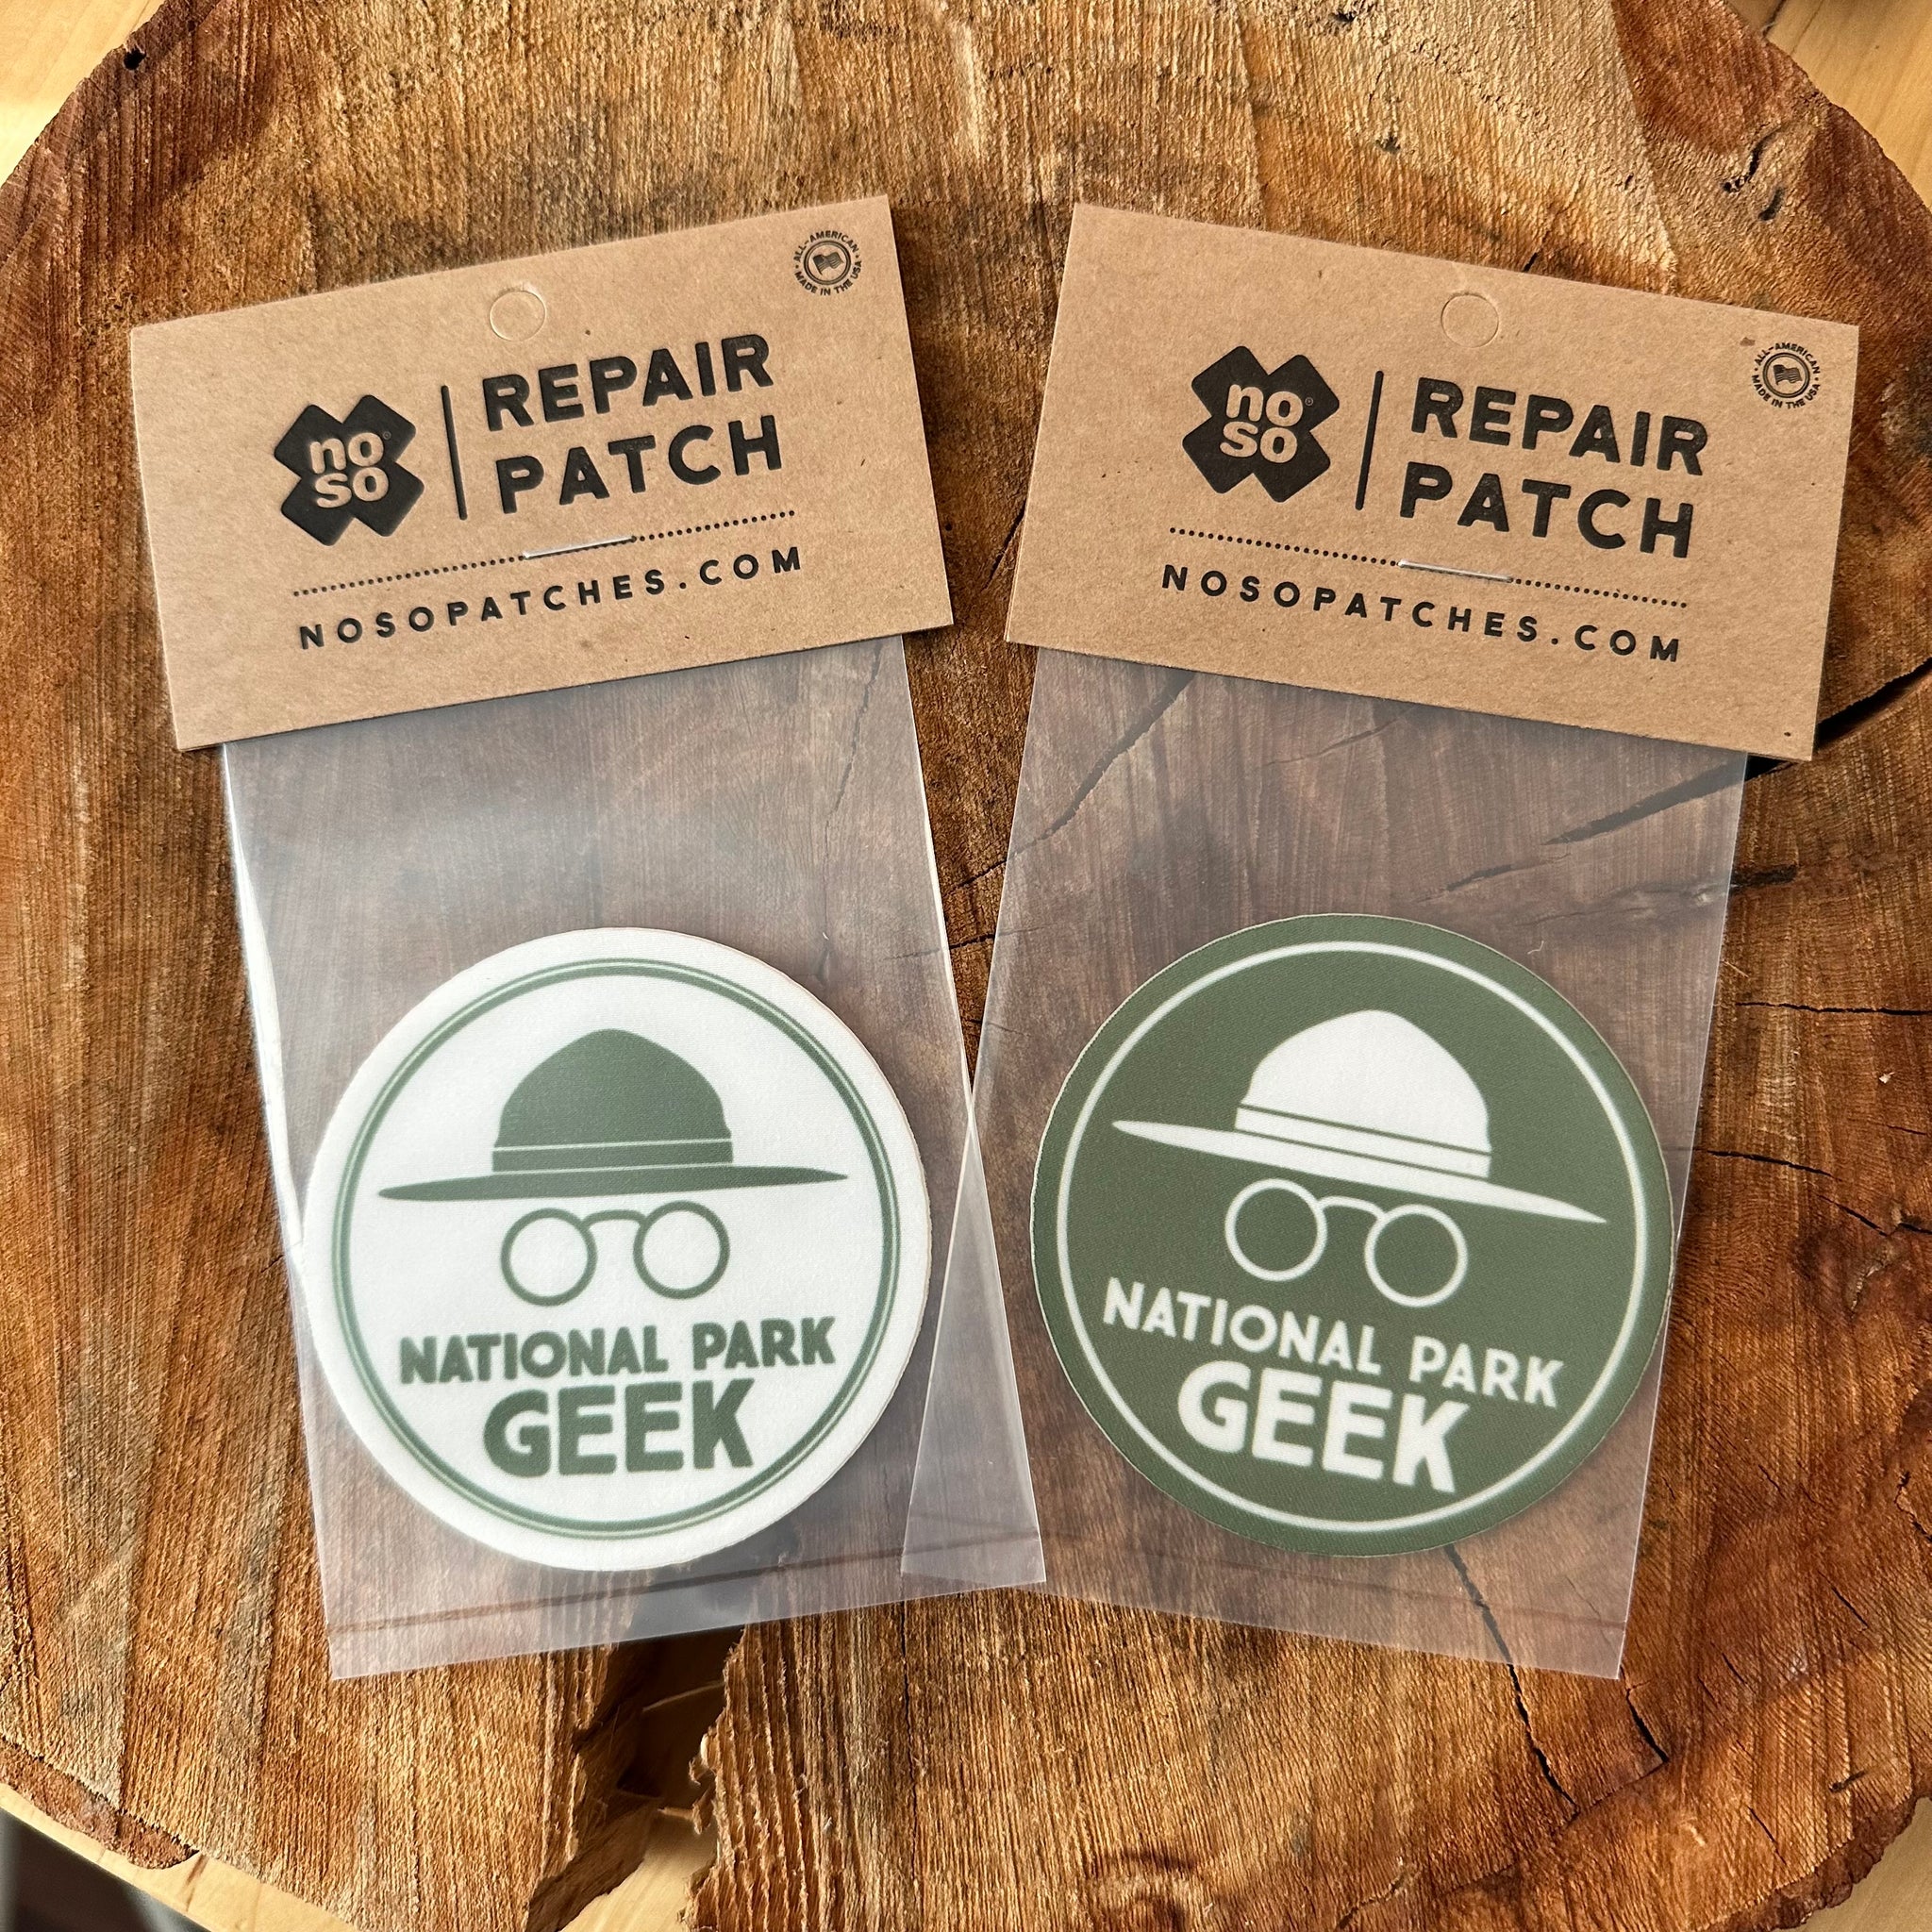 Combo Pack by NOSO - National Park Geek Gear Repair Patch - green & white  (includes US shipping, via USPS)